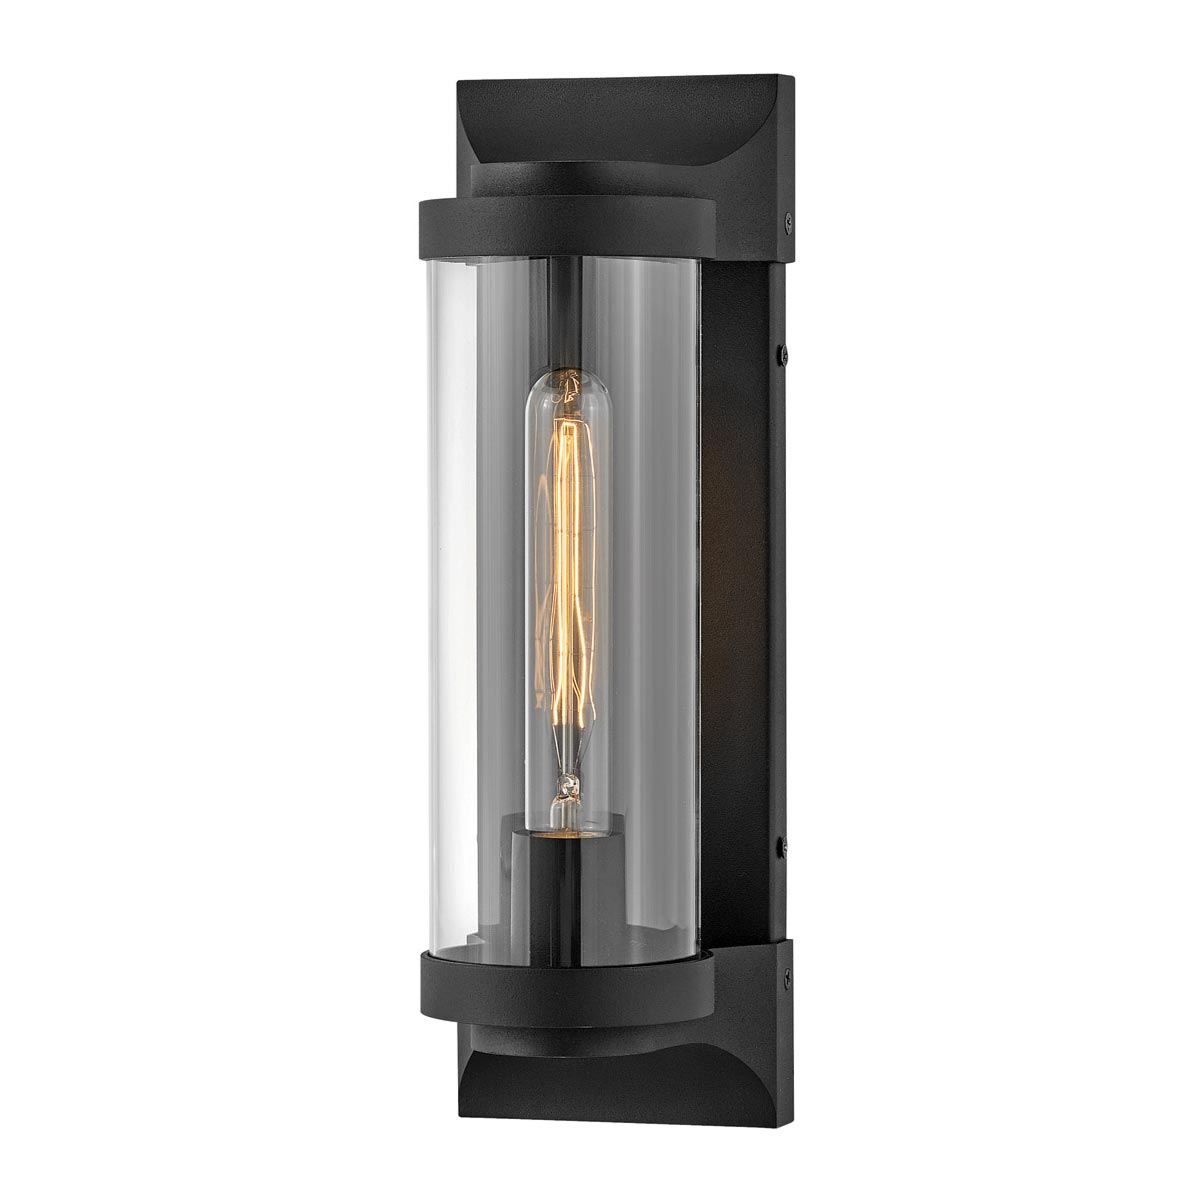 Quintiesse Pearson Art Deco Style Single Outdoor Wall Light Black